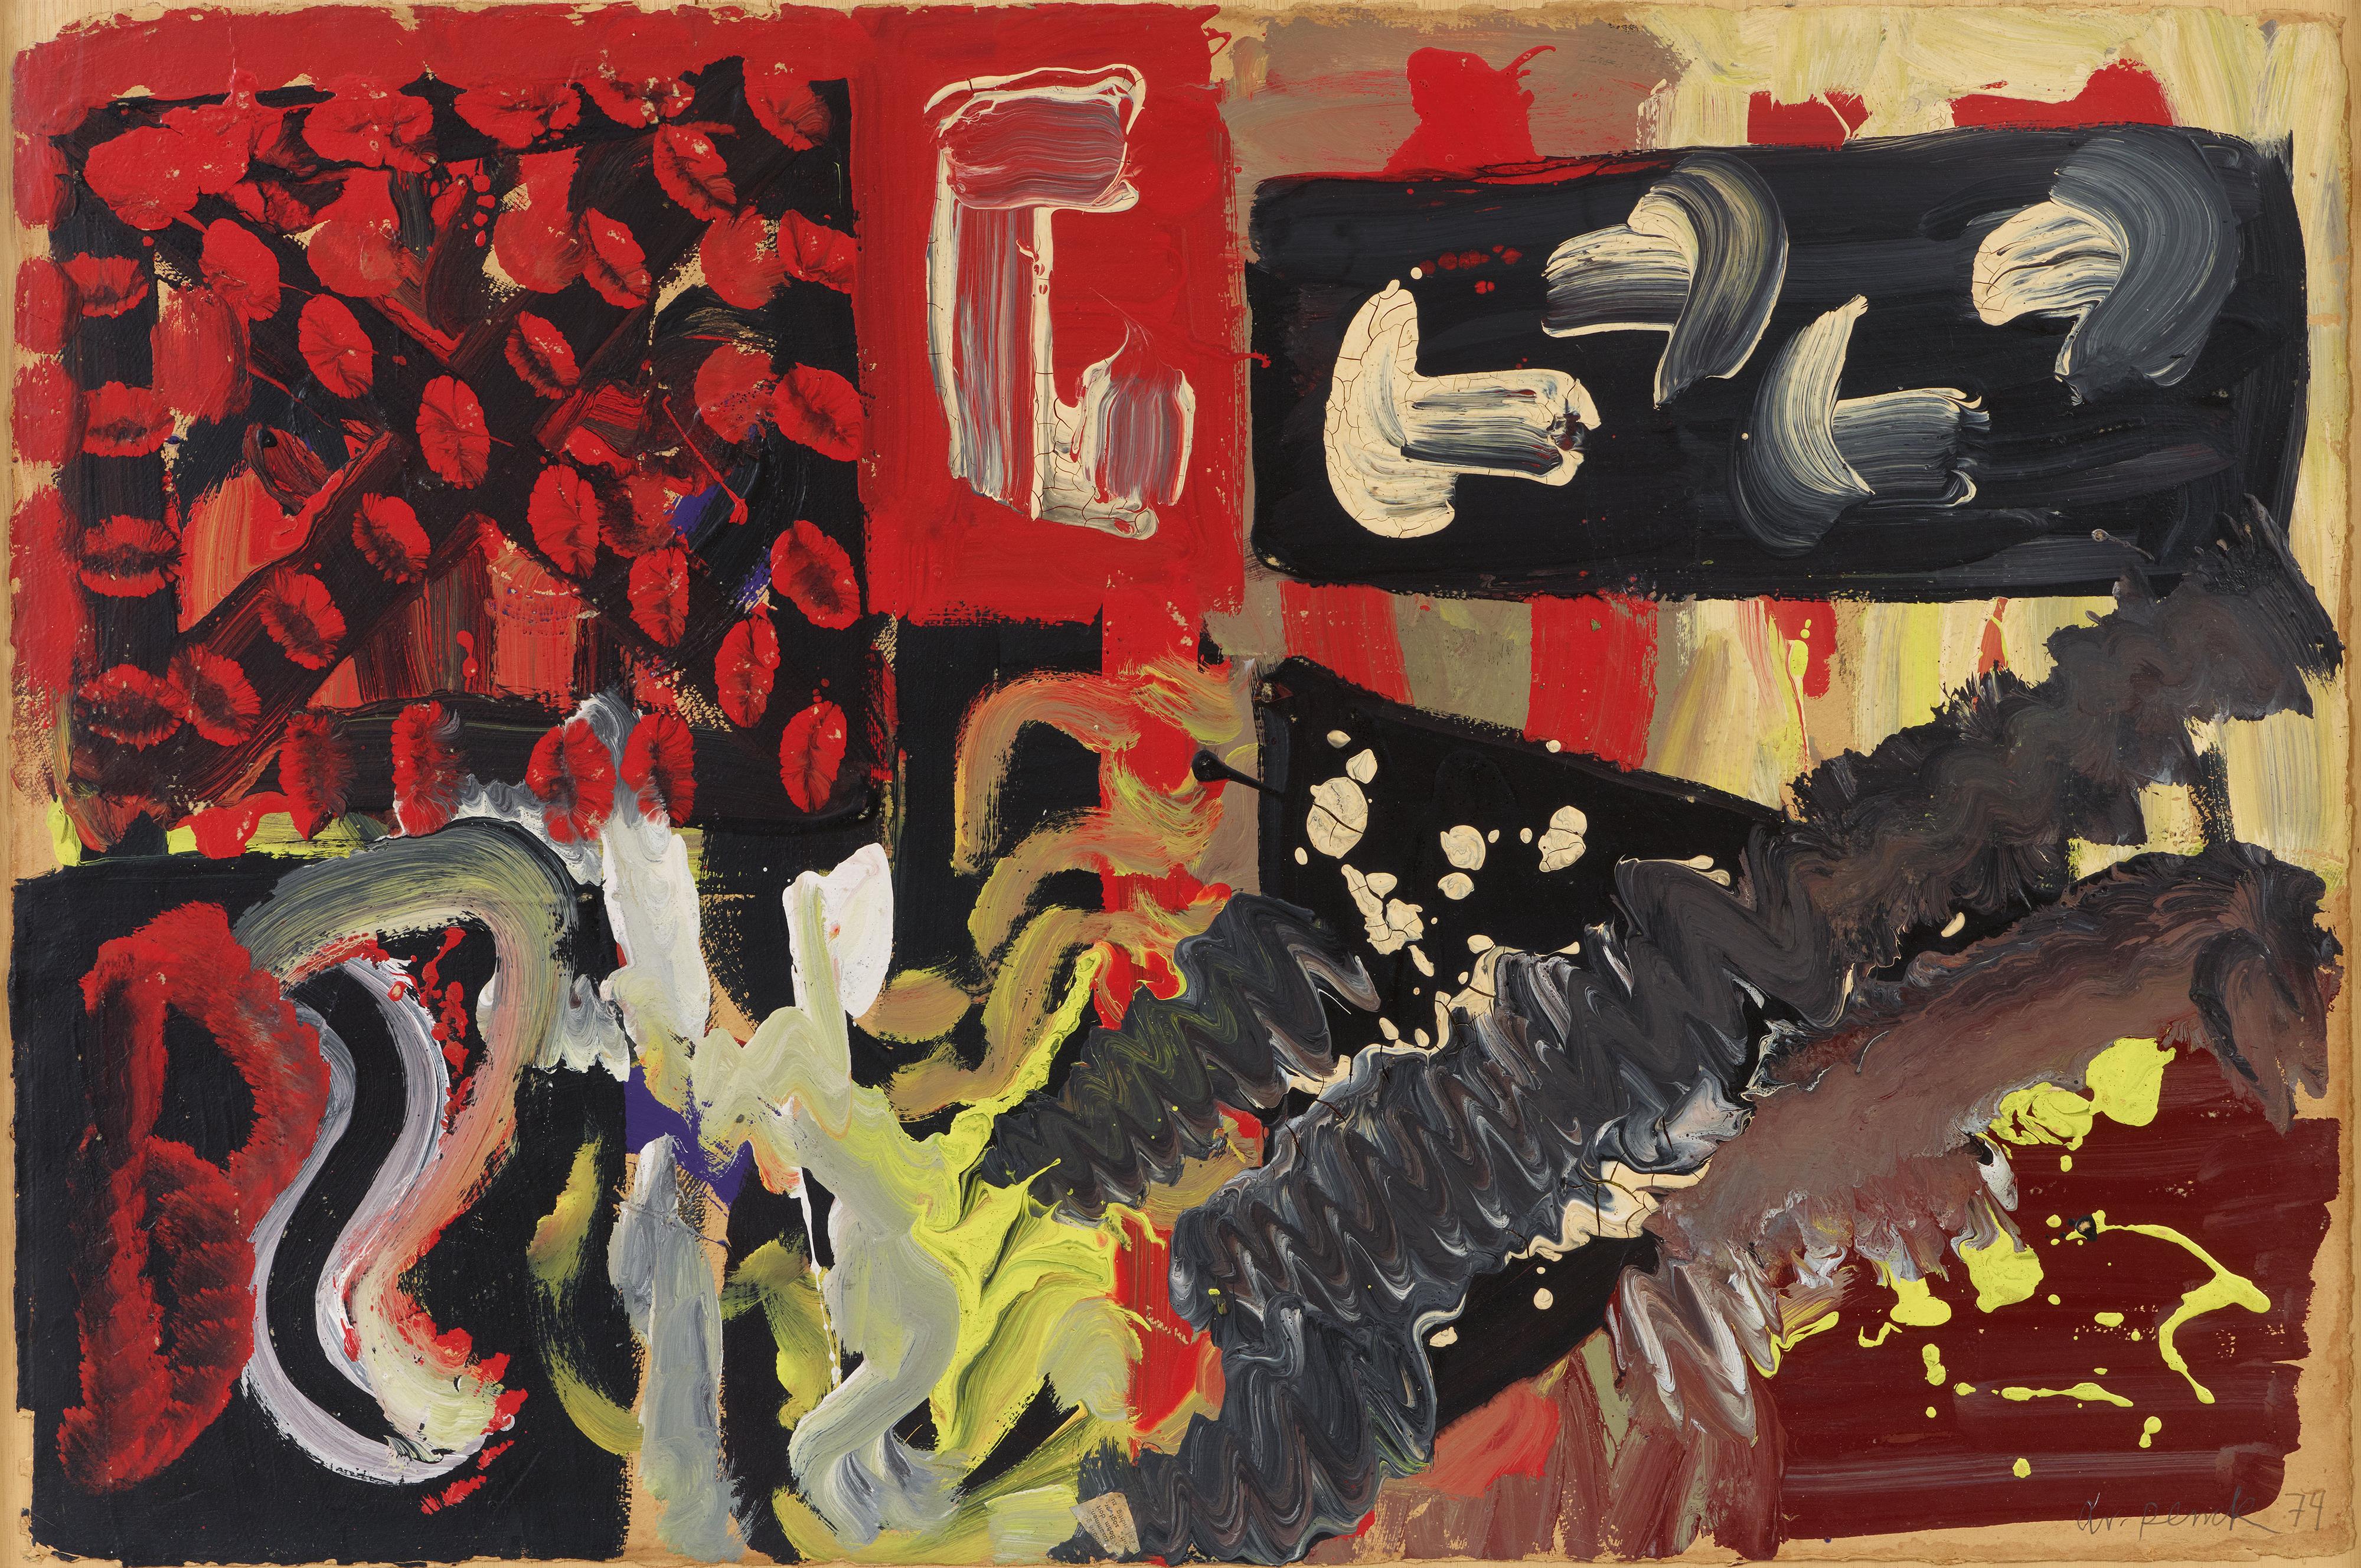 A.R. Penck - Untitled - image-1